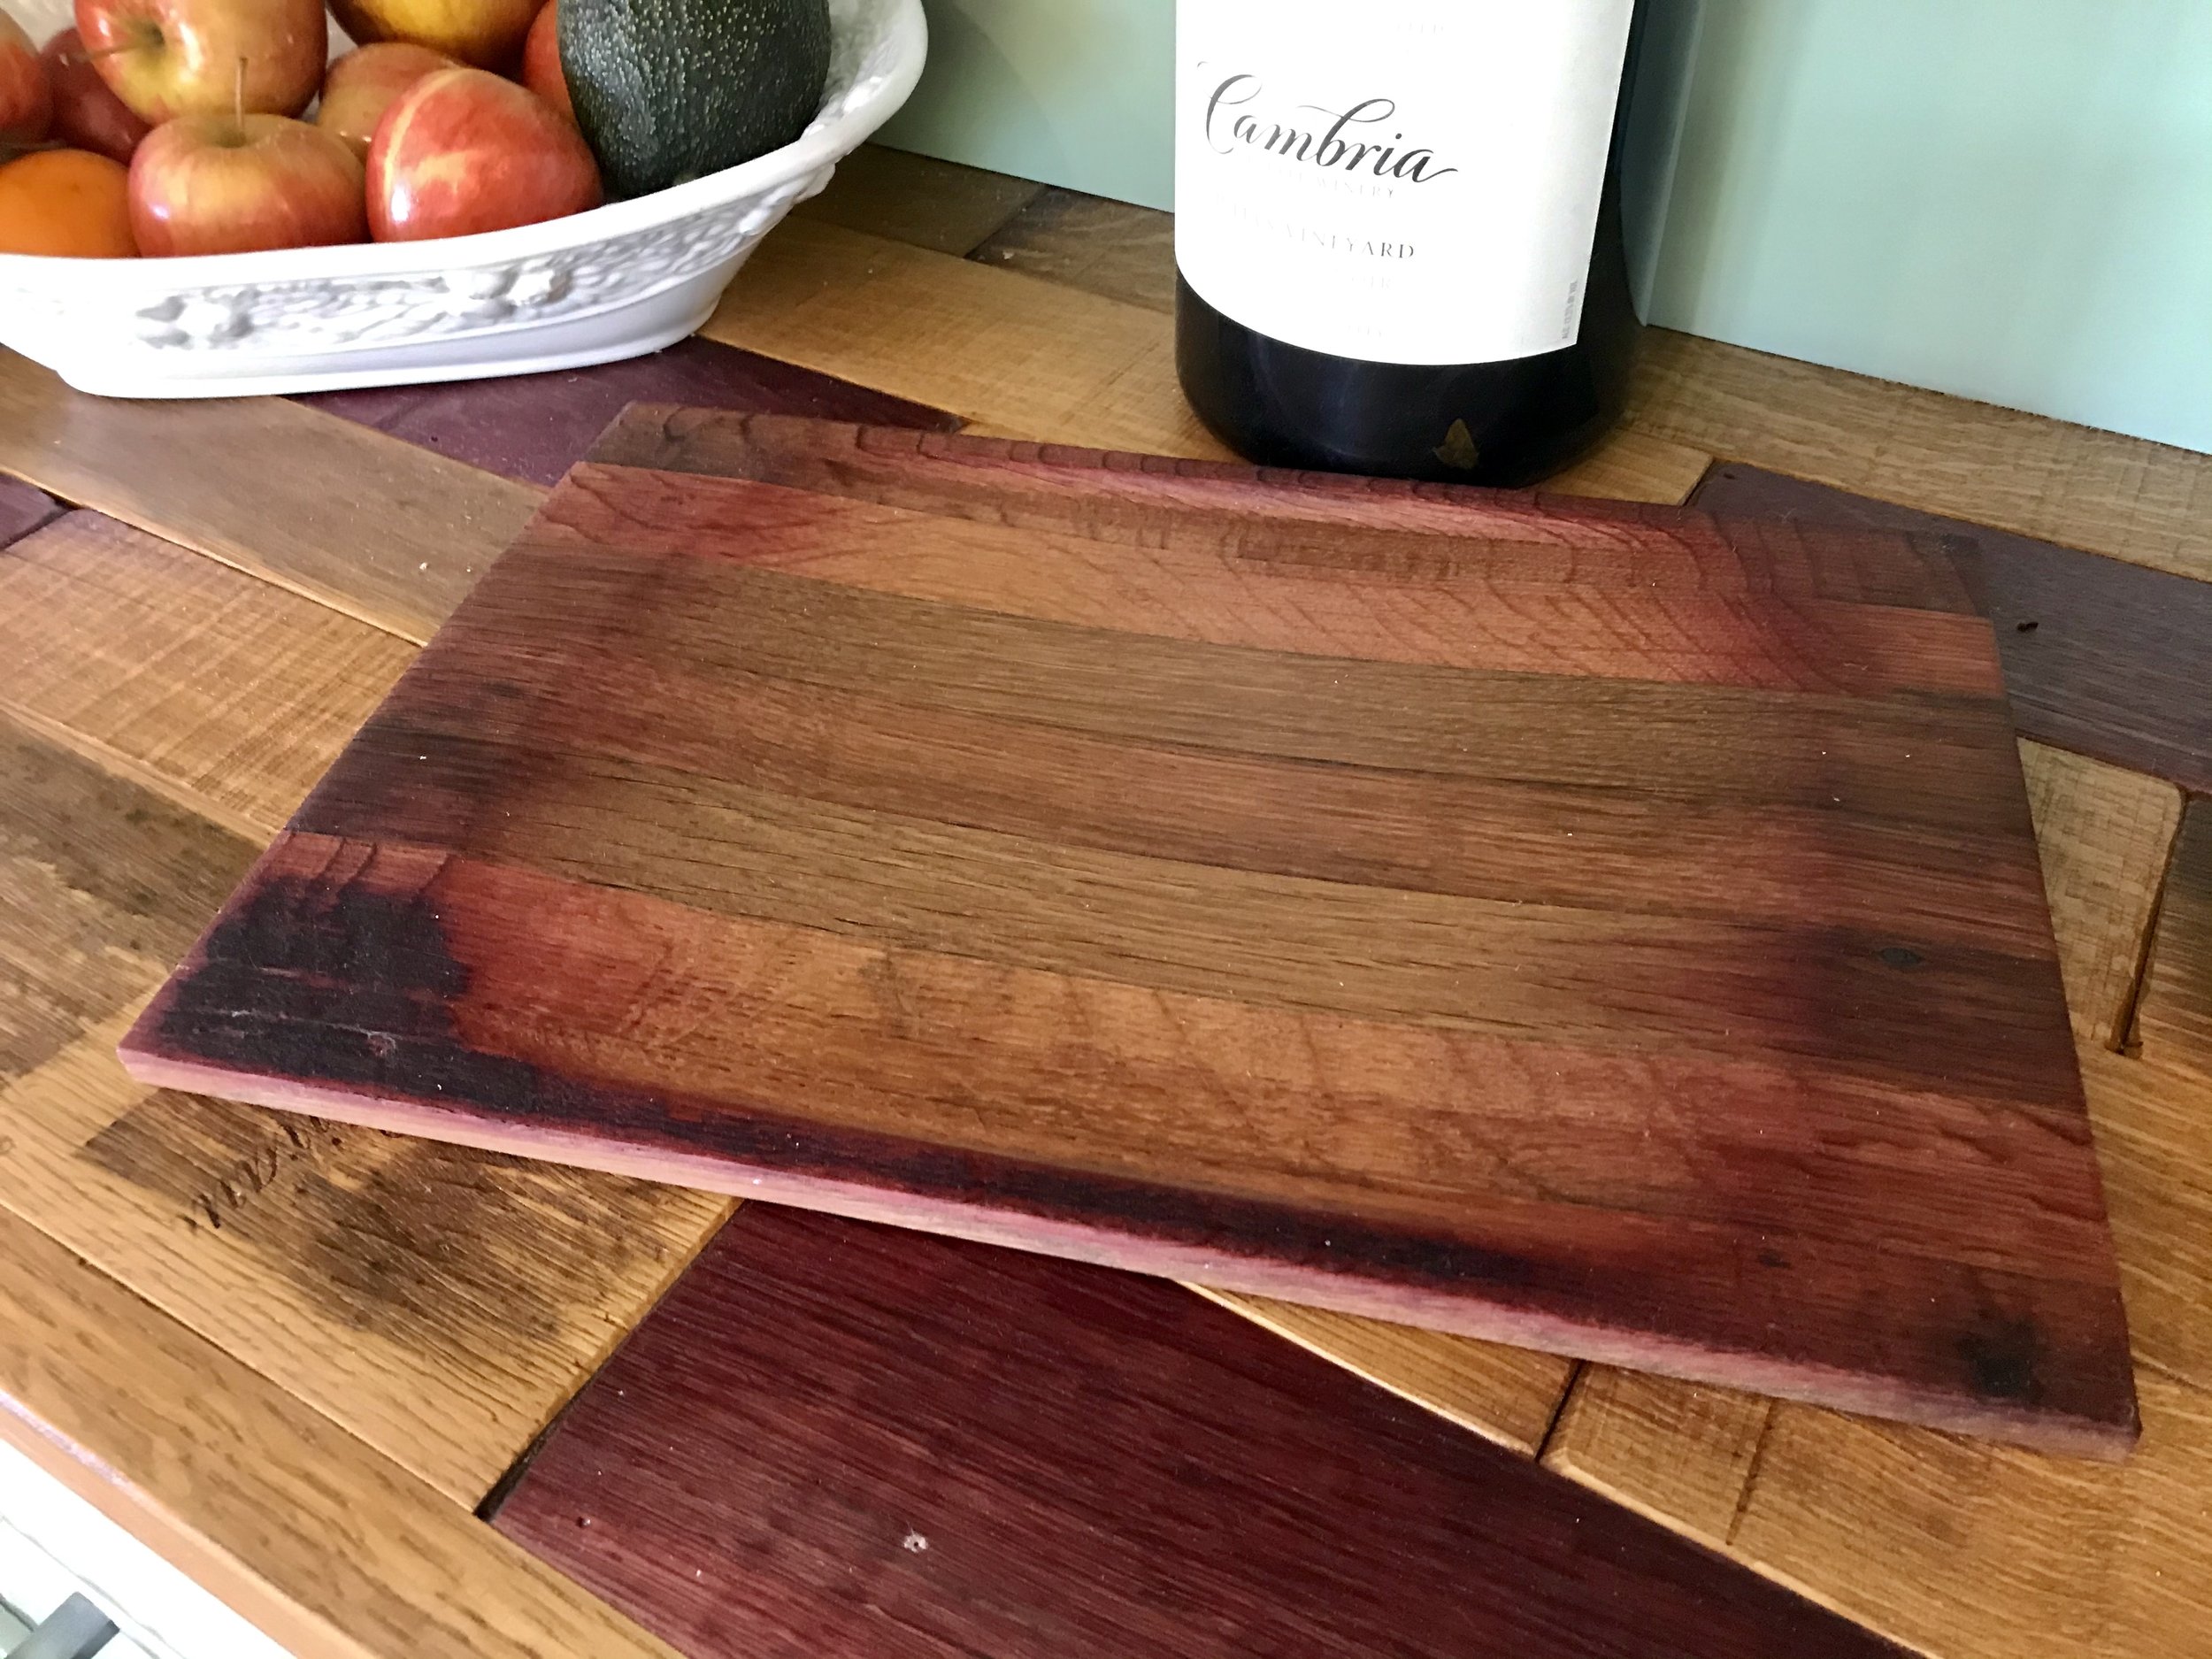  restaurant cutting board designed and built by Tempo Designs Gabriel McKeagney 